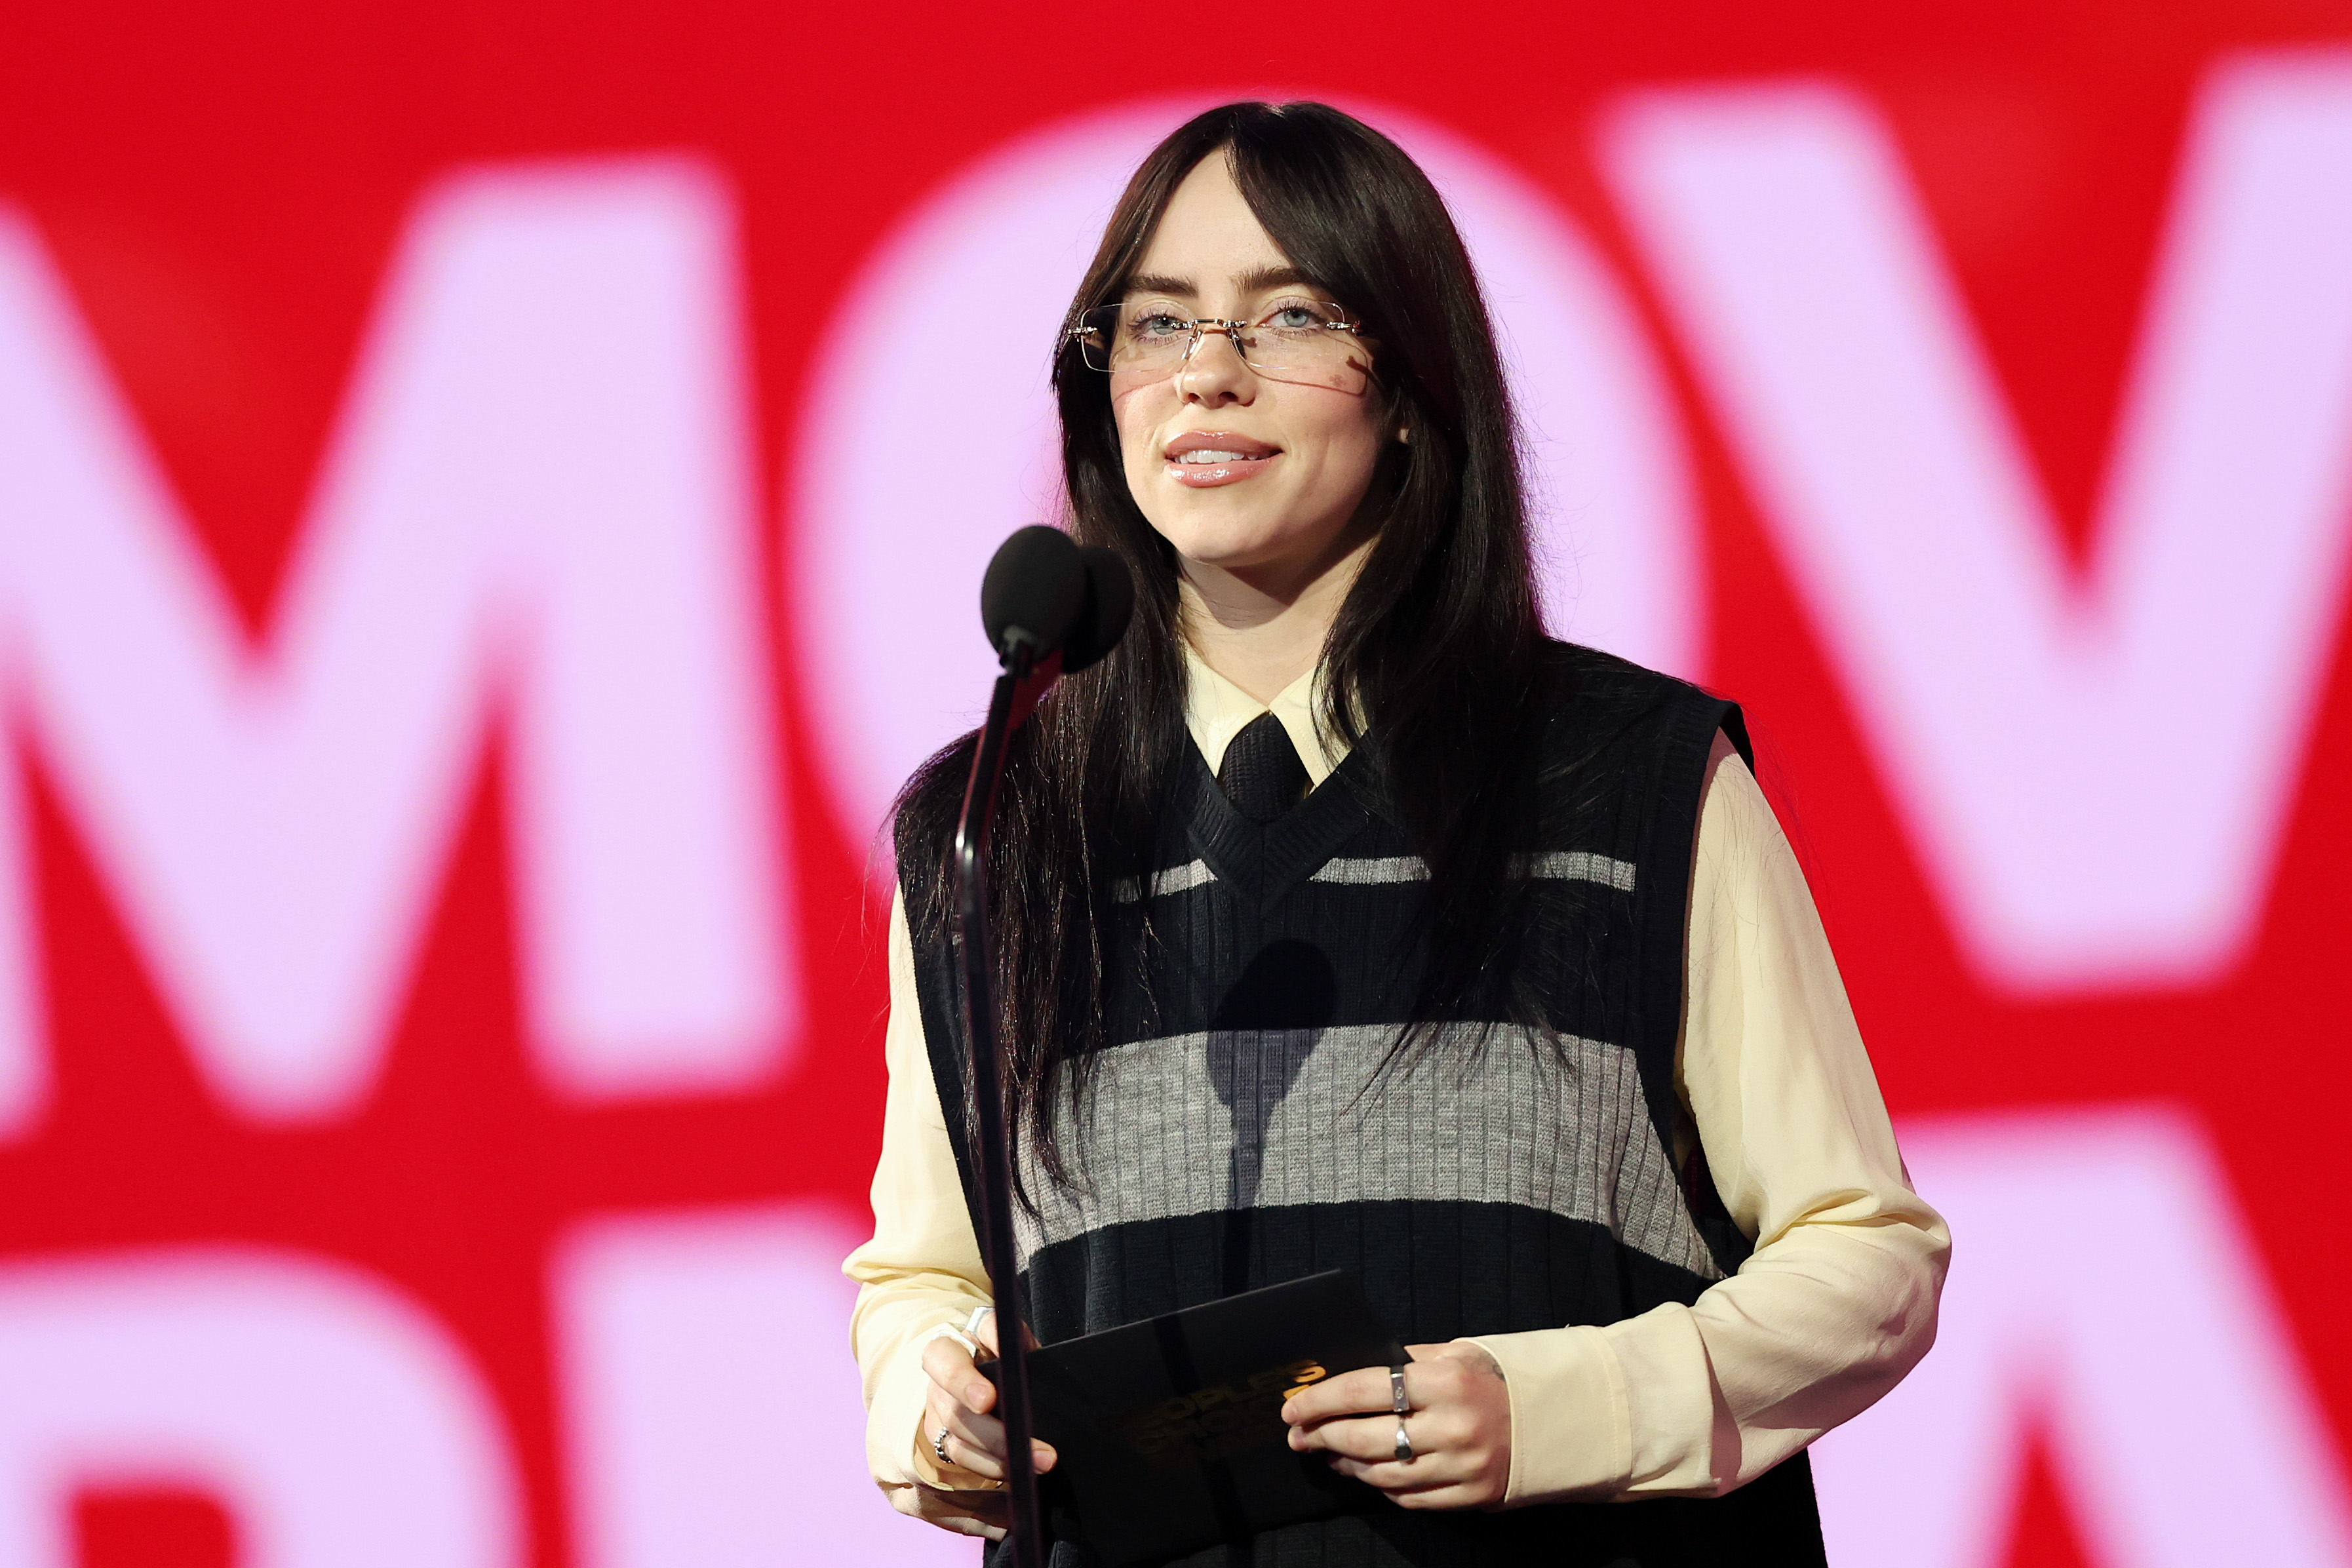 Billie Eilish stands at a microphone wearing a sleeveless sweater over a shirt